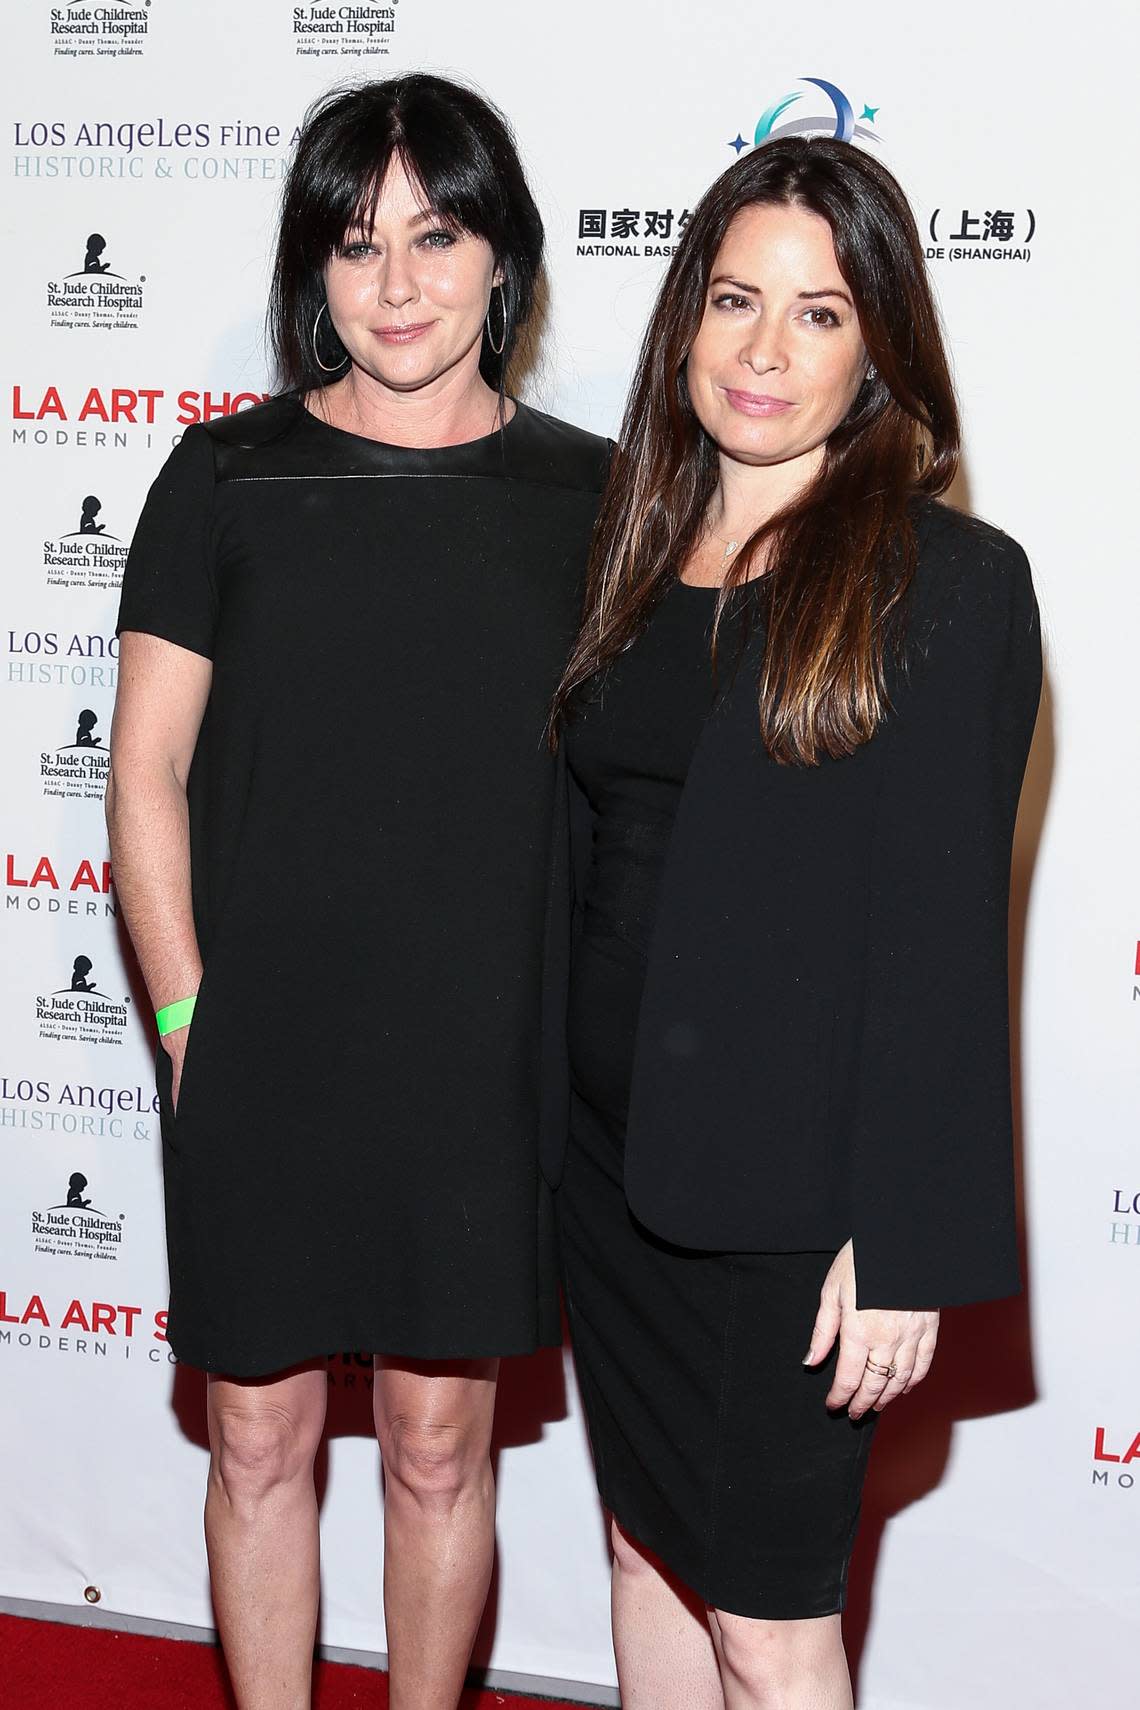 Shannen Doherty, left, and Holly Marie Combs, shown in 2016, were two of the three Halliwell sisters in the WB TV series “Charmed.” Alyssa Milano was the third sister.